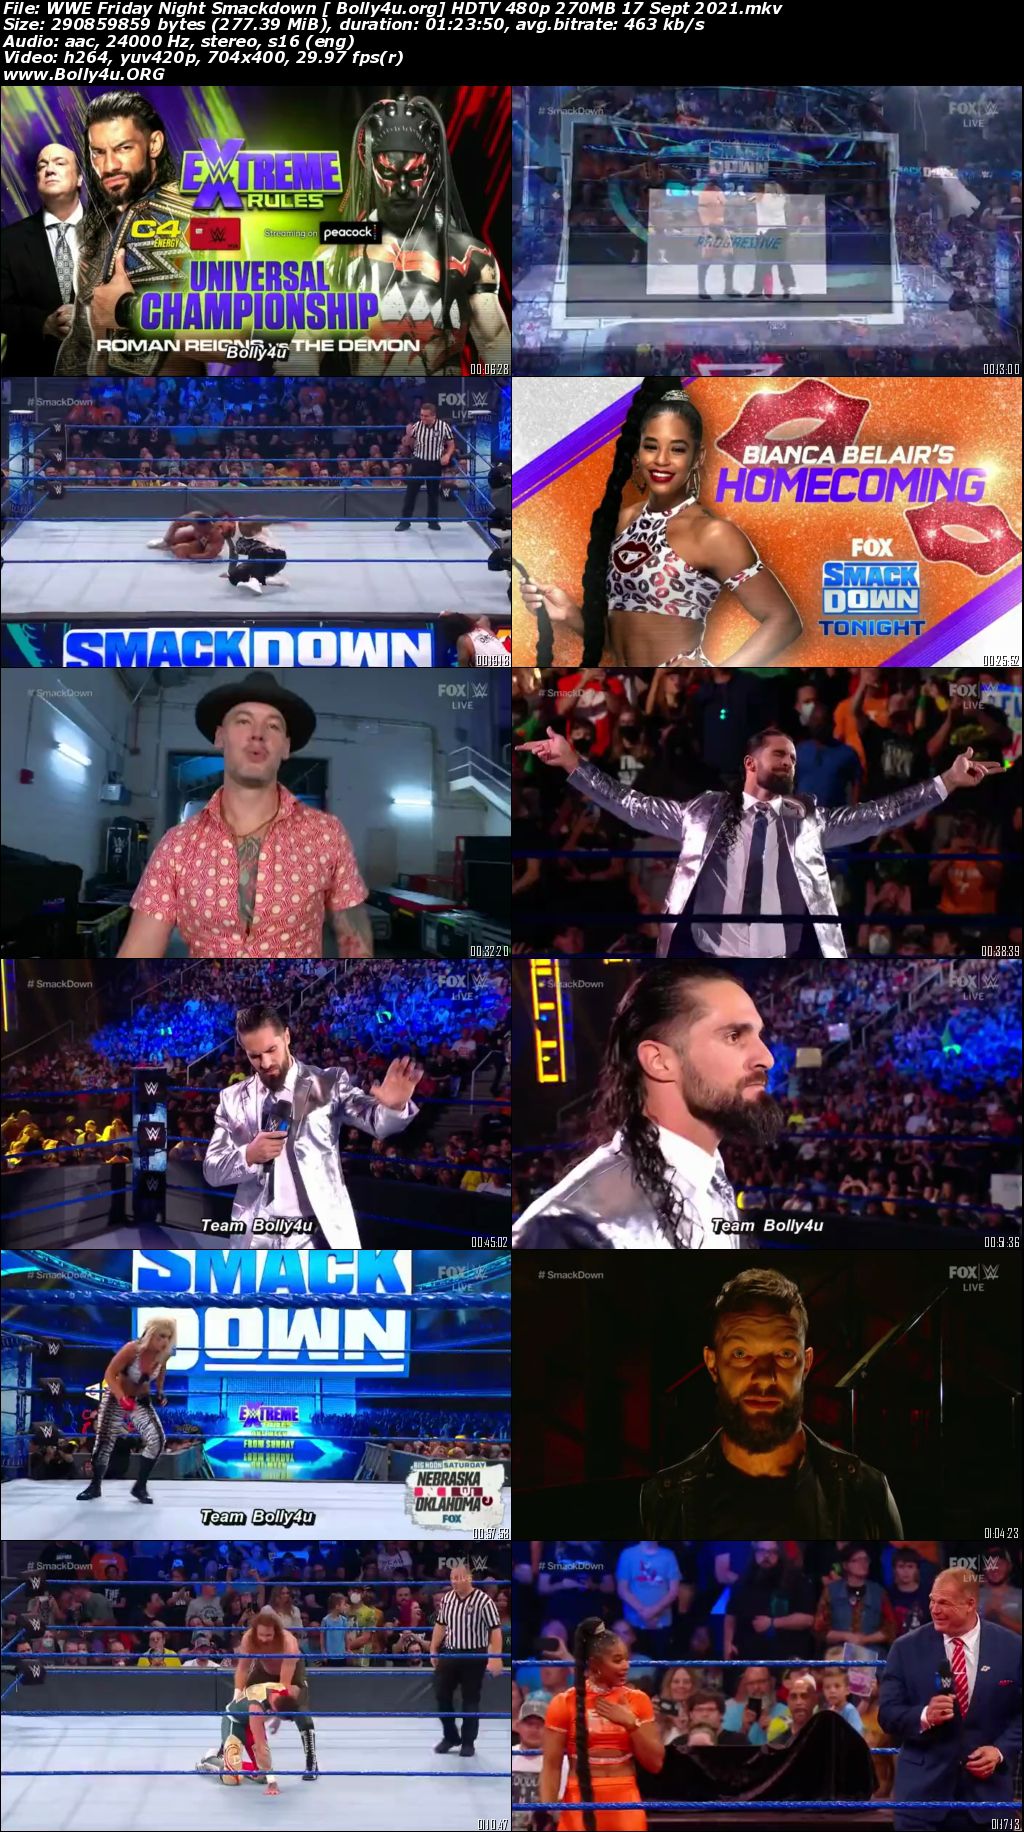 WWE Friday Night Smackdown HDTV 480p 270MB 17 Sept 2021 Download